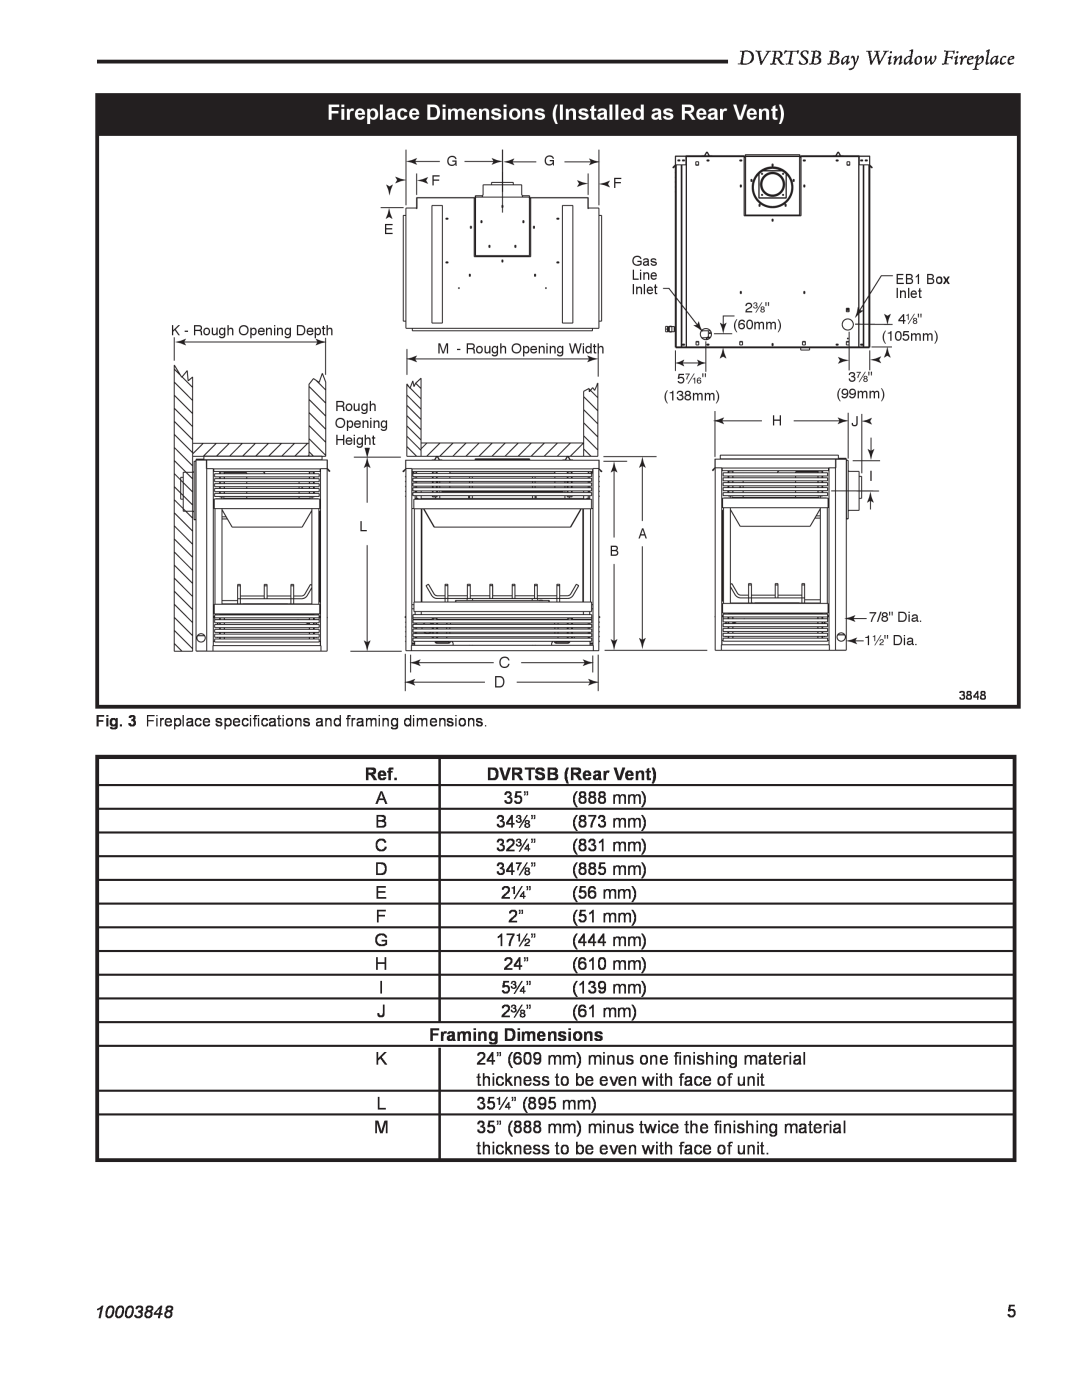 Vermont Casting Fireplace Dimensions Installed as Rear Vent, DVRTSB Bay Window Fireplace, DVRTSB Rear Vent, 10003848 